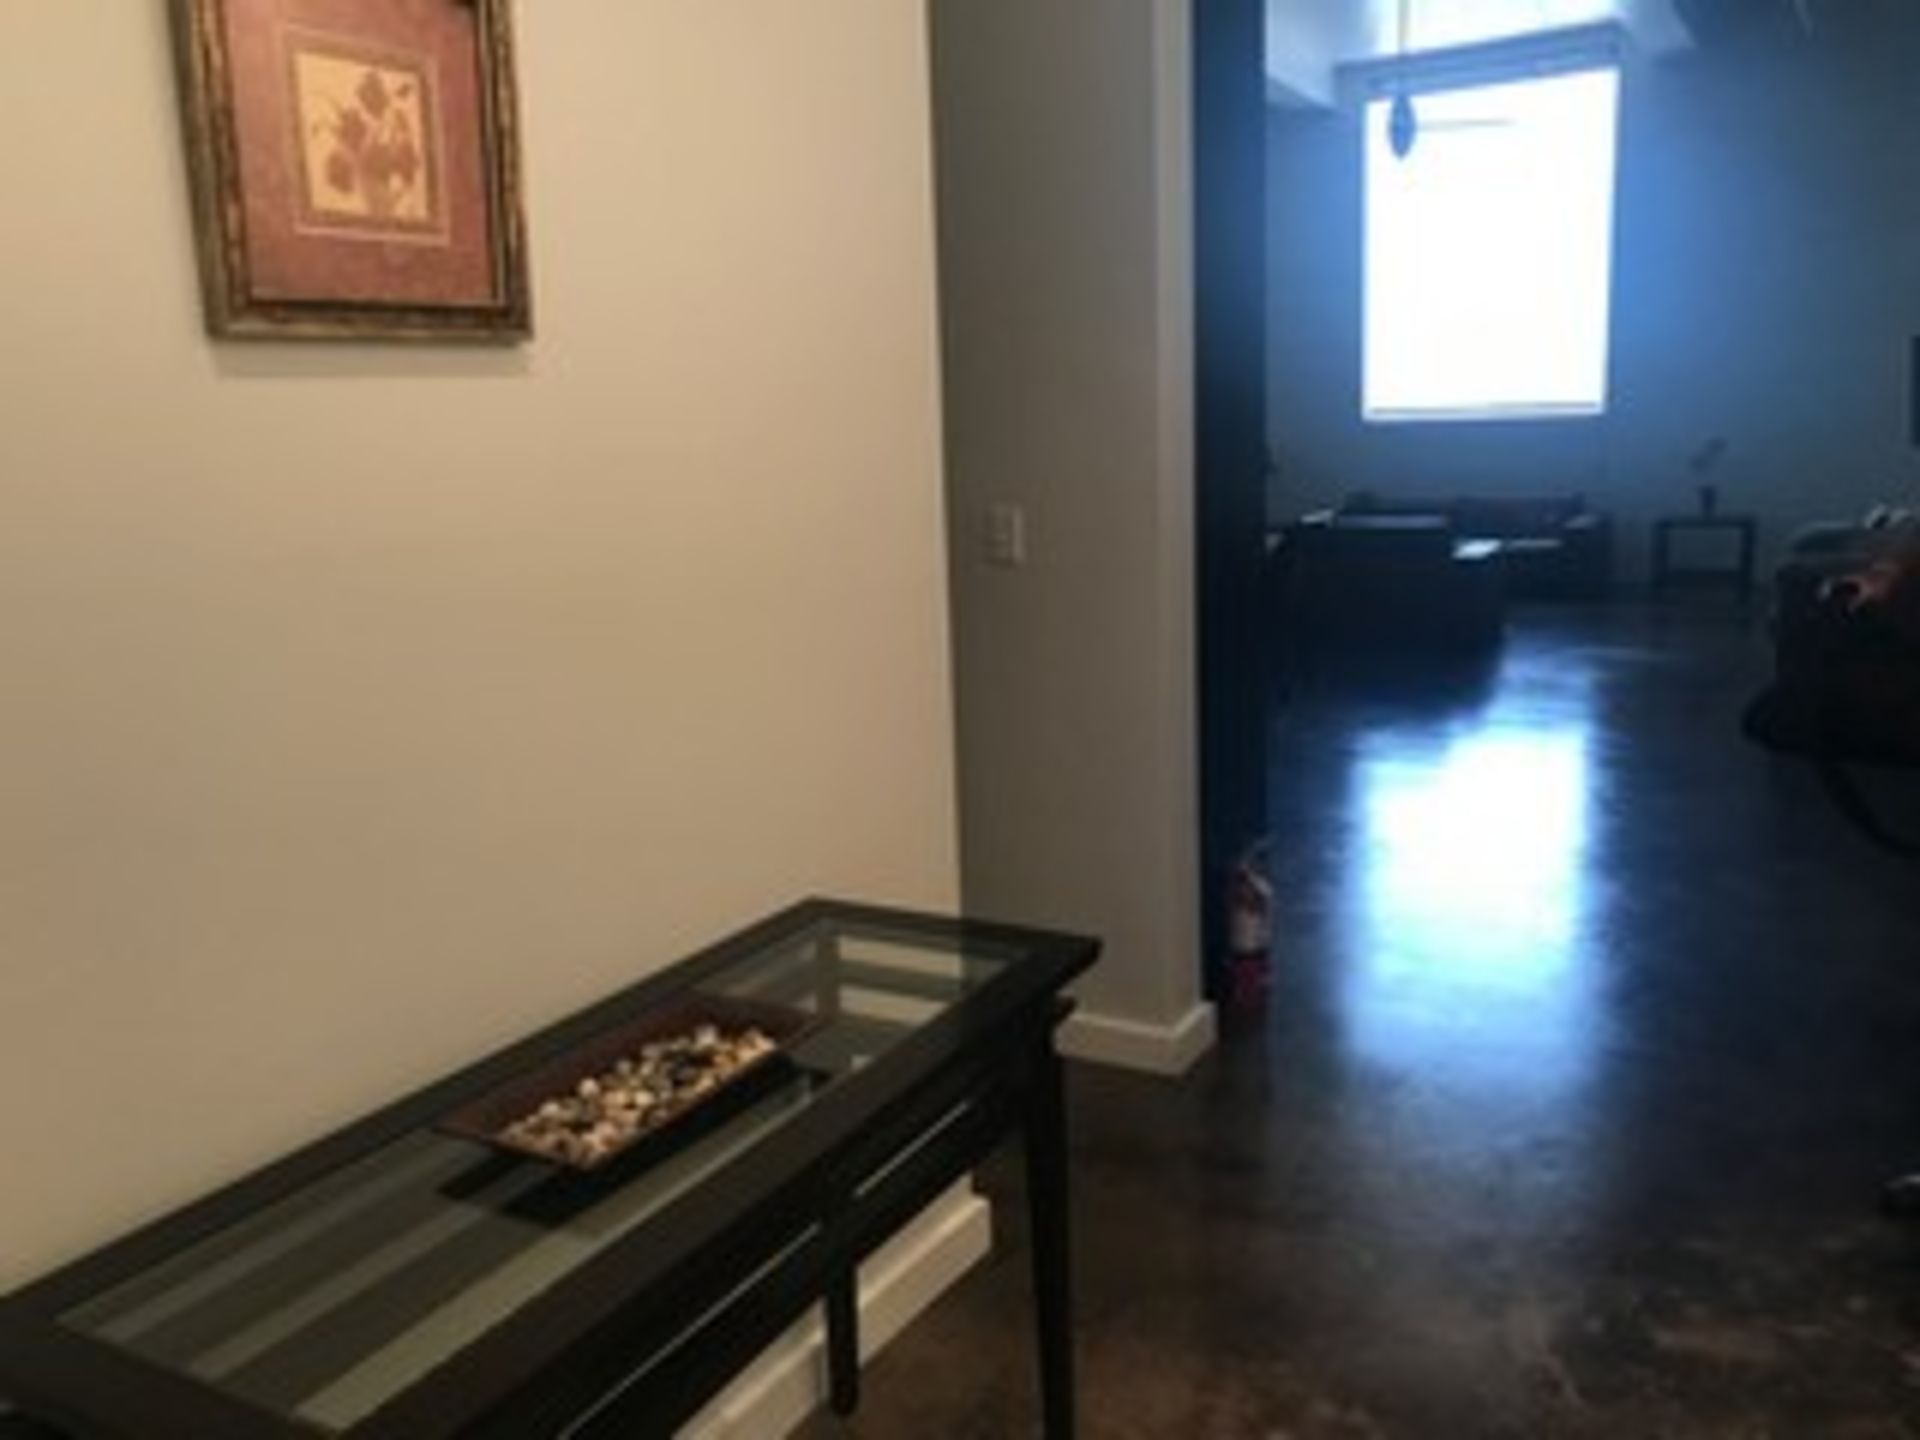 LOT CONTENTS OF CONDO - NO APPLIANCES (LOCATED IN NEW ORLEANS, LA) - Image 4 of 9